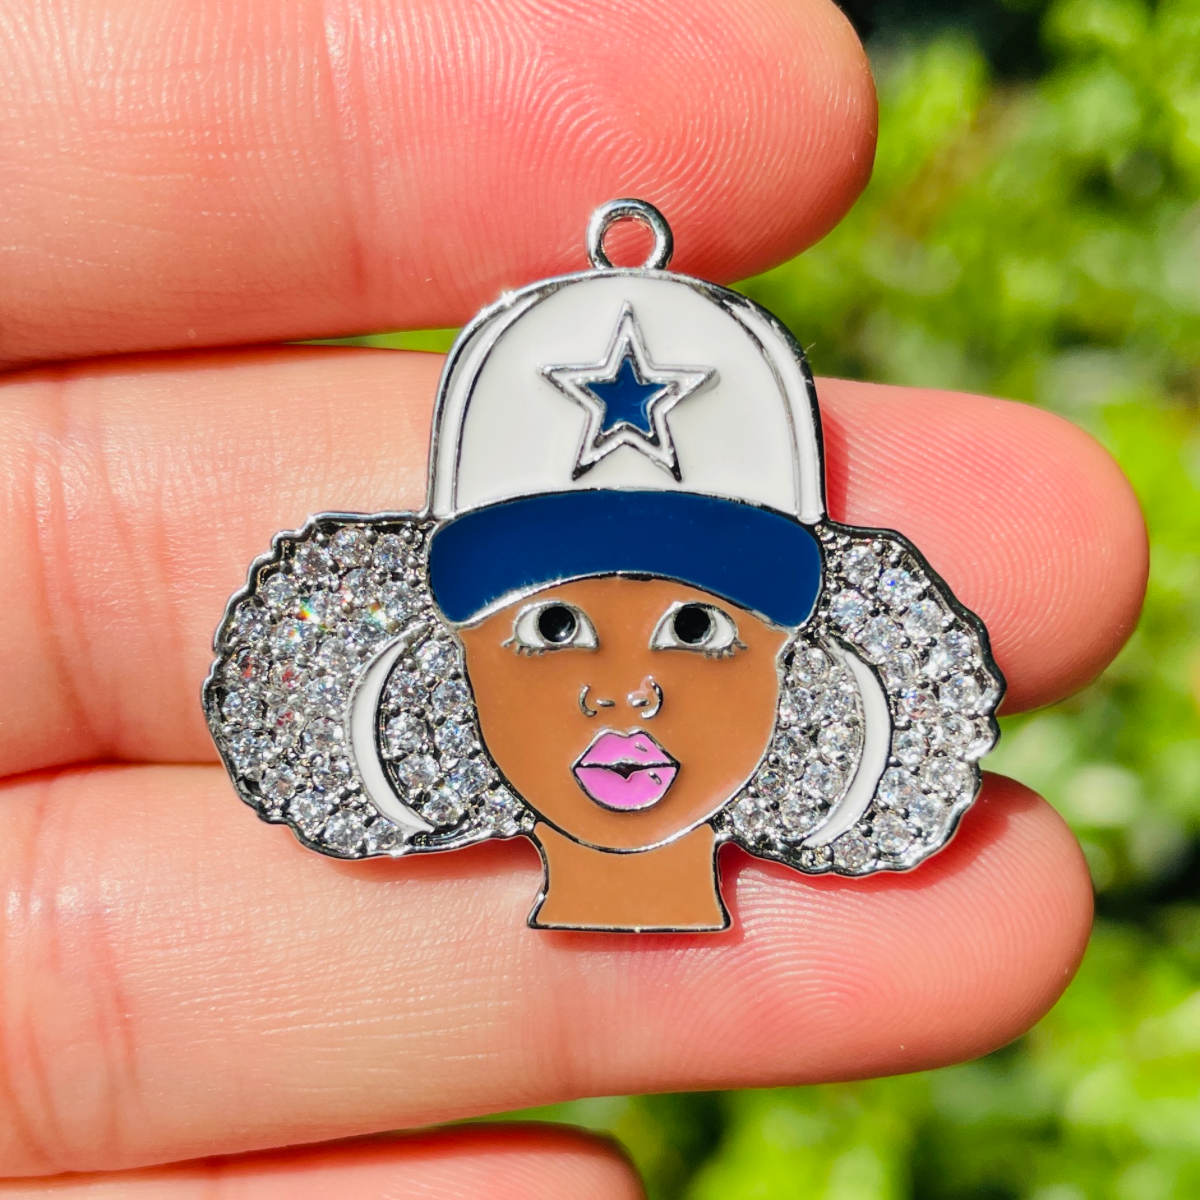 10pcs/lot 32.8*29.5mm CZ Paved Cowboys Black Girl Charms Silver CZ Paved Charms Afro Girl/Queen Charms American Football Sports New Charms Arrivals Charms Beads Beyond